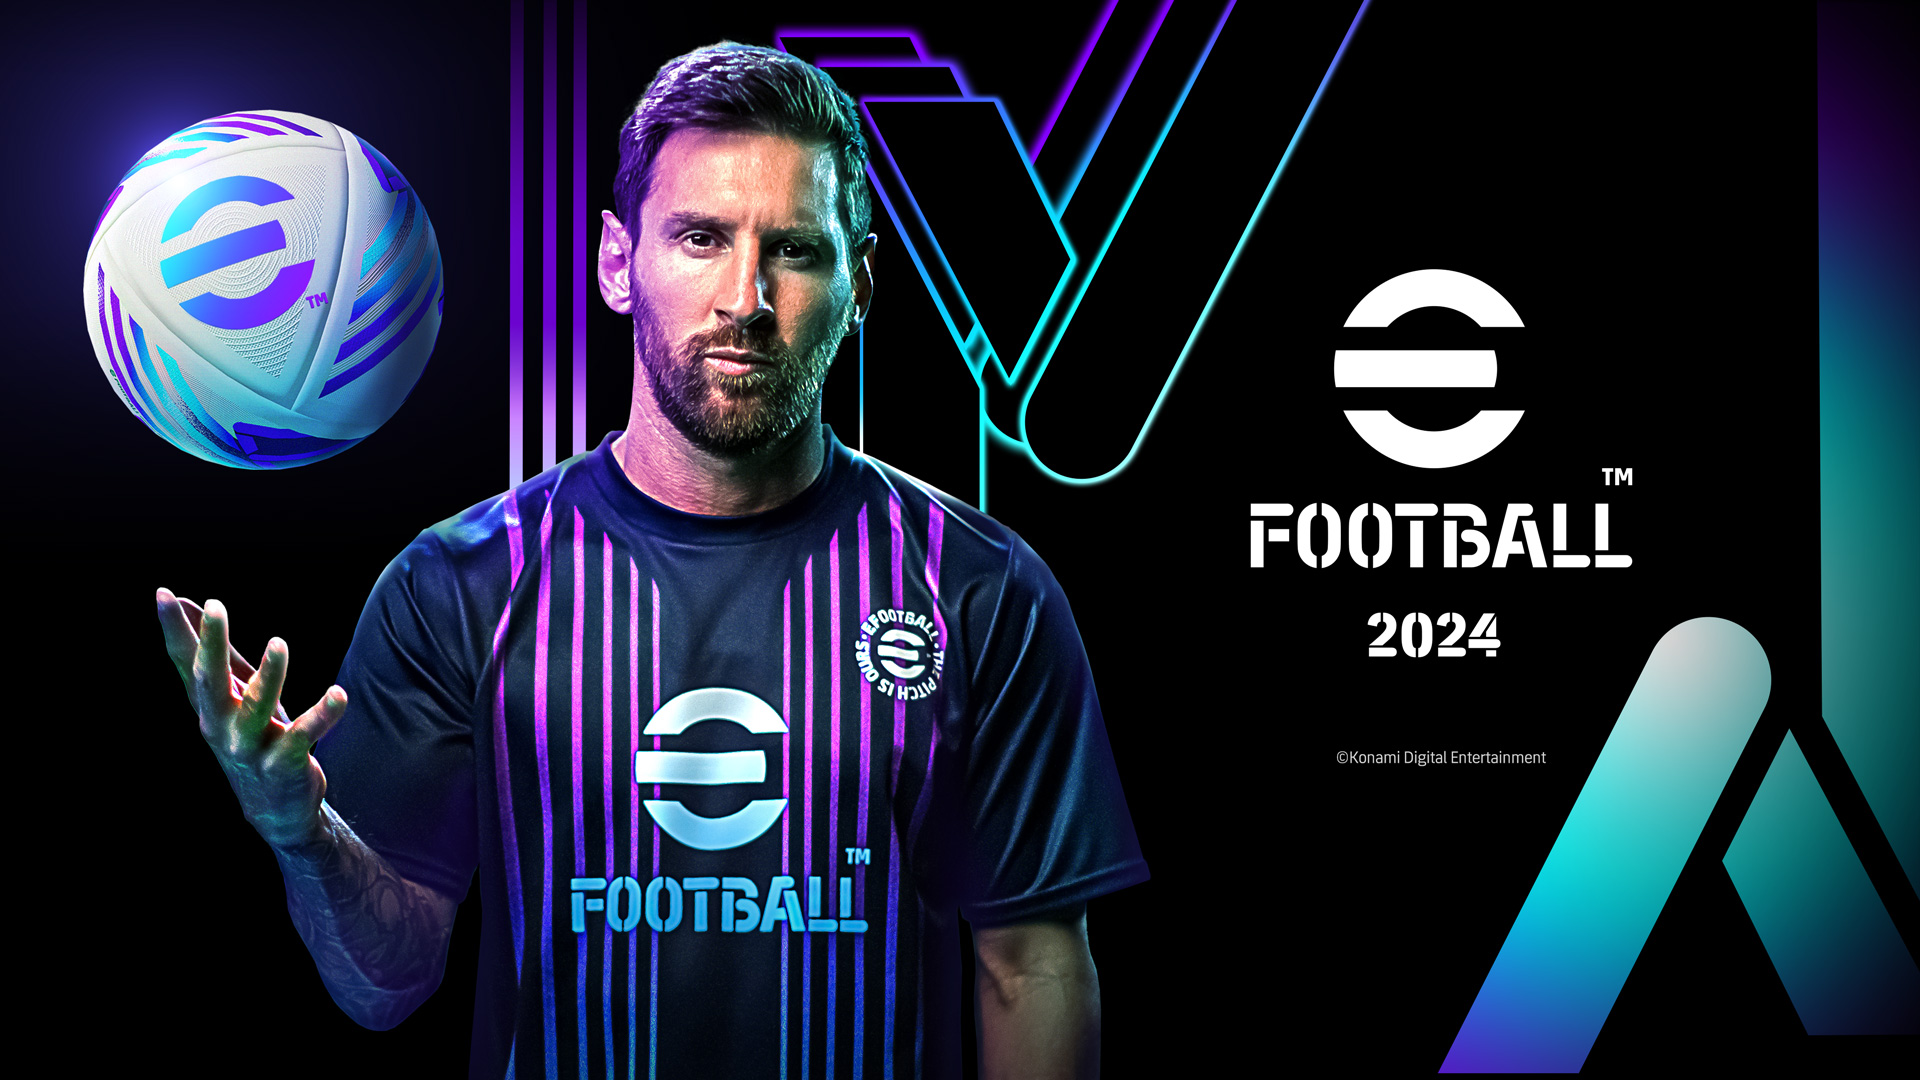 Football Manager 2022: Release date, new features, price, full game &  devices